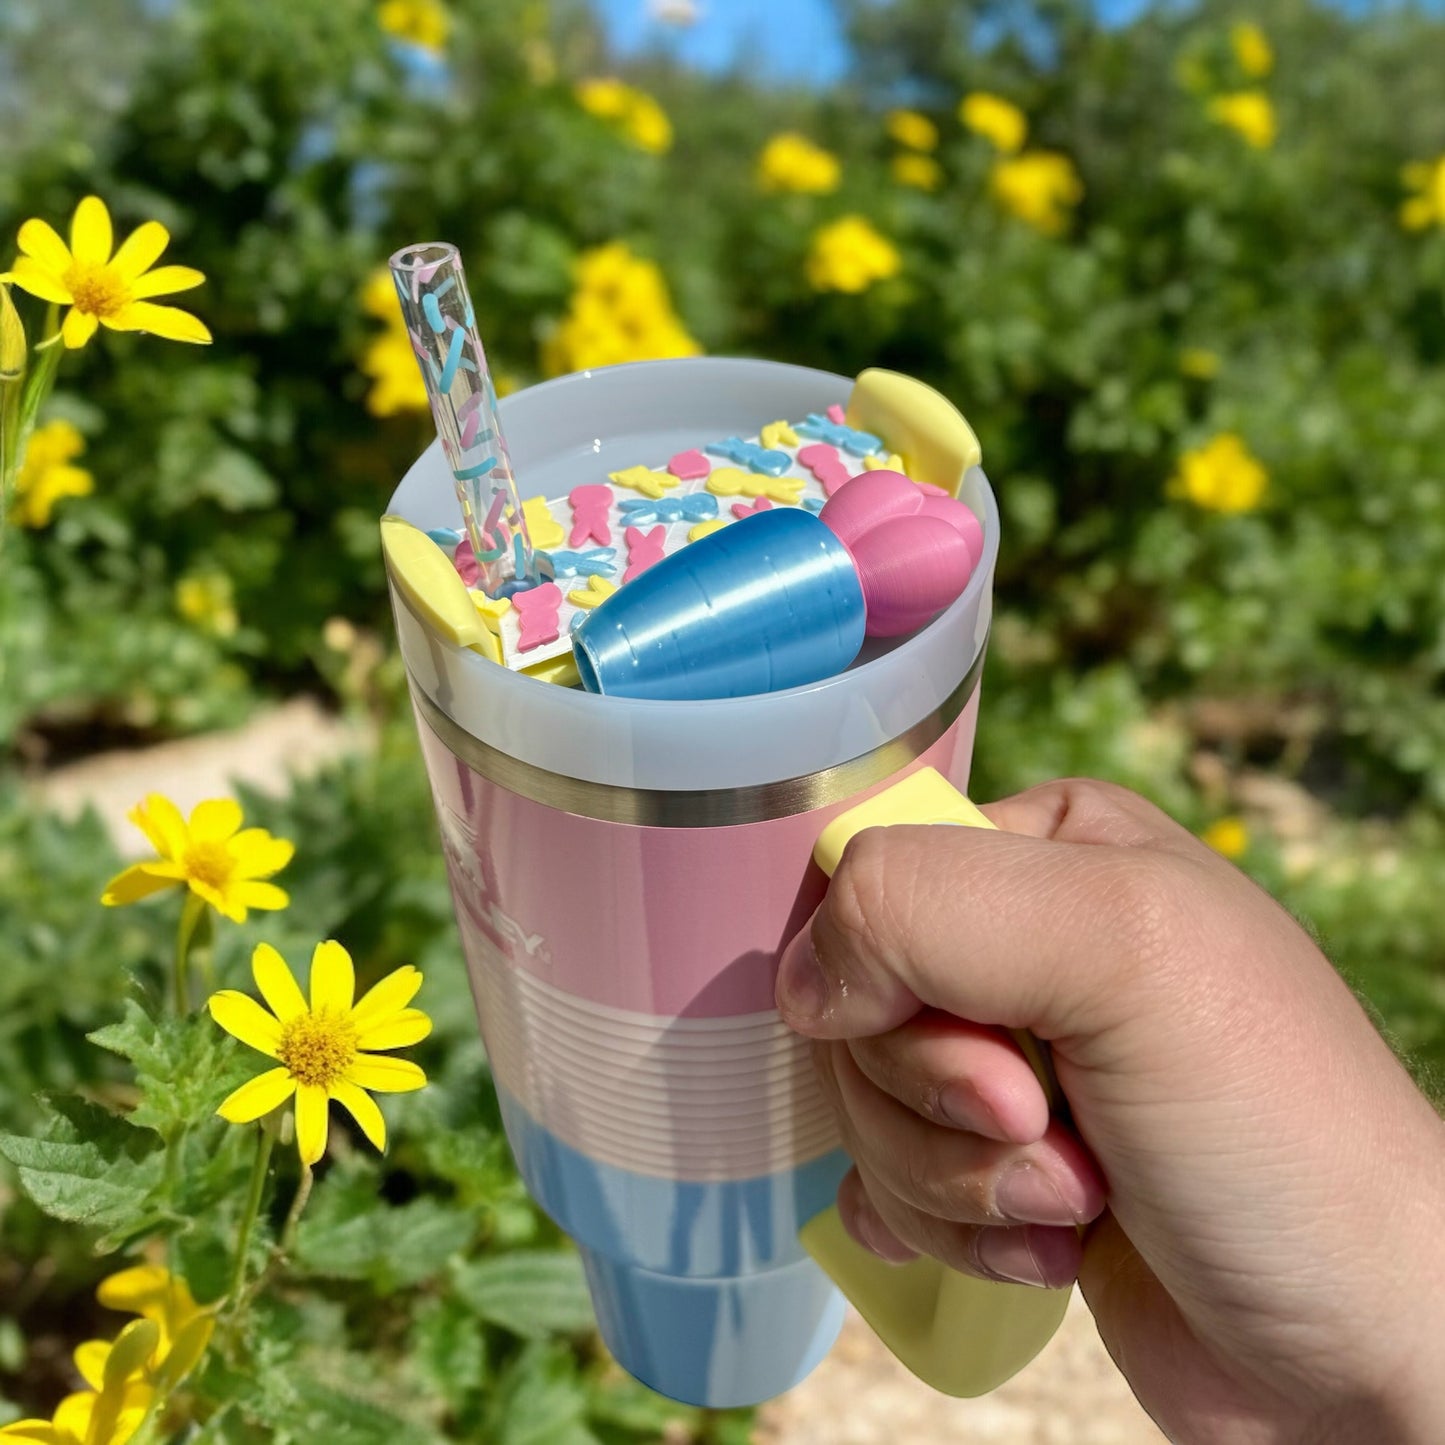 LIMITED EDITION Pastel Pop Peep Bunnies Lid Topper, Straw Topper, and Matching Sprinkles Straw Set